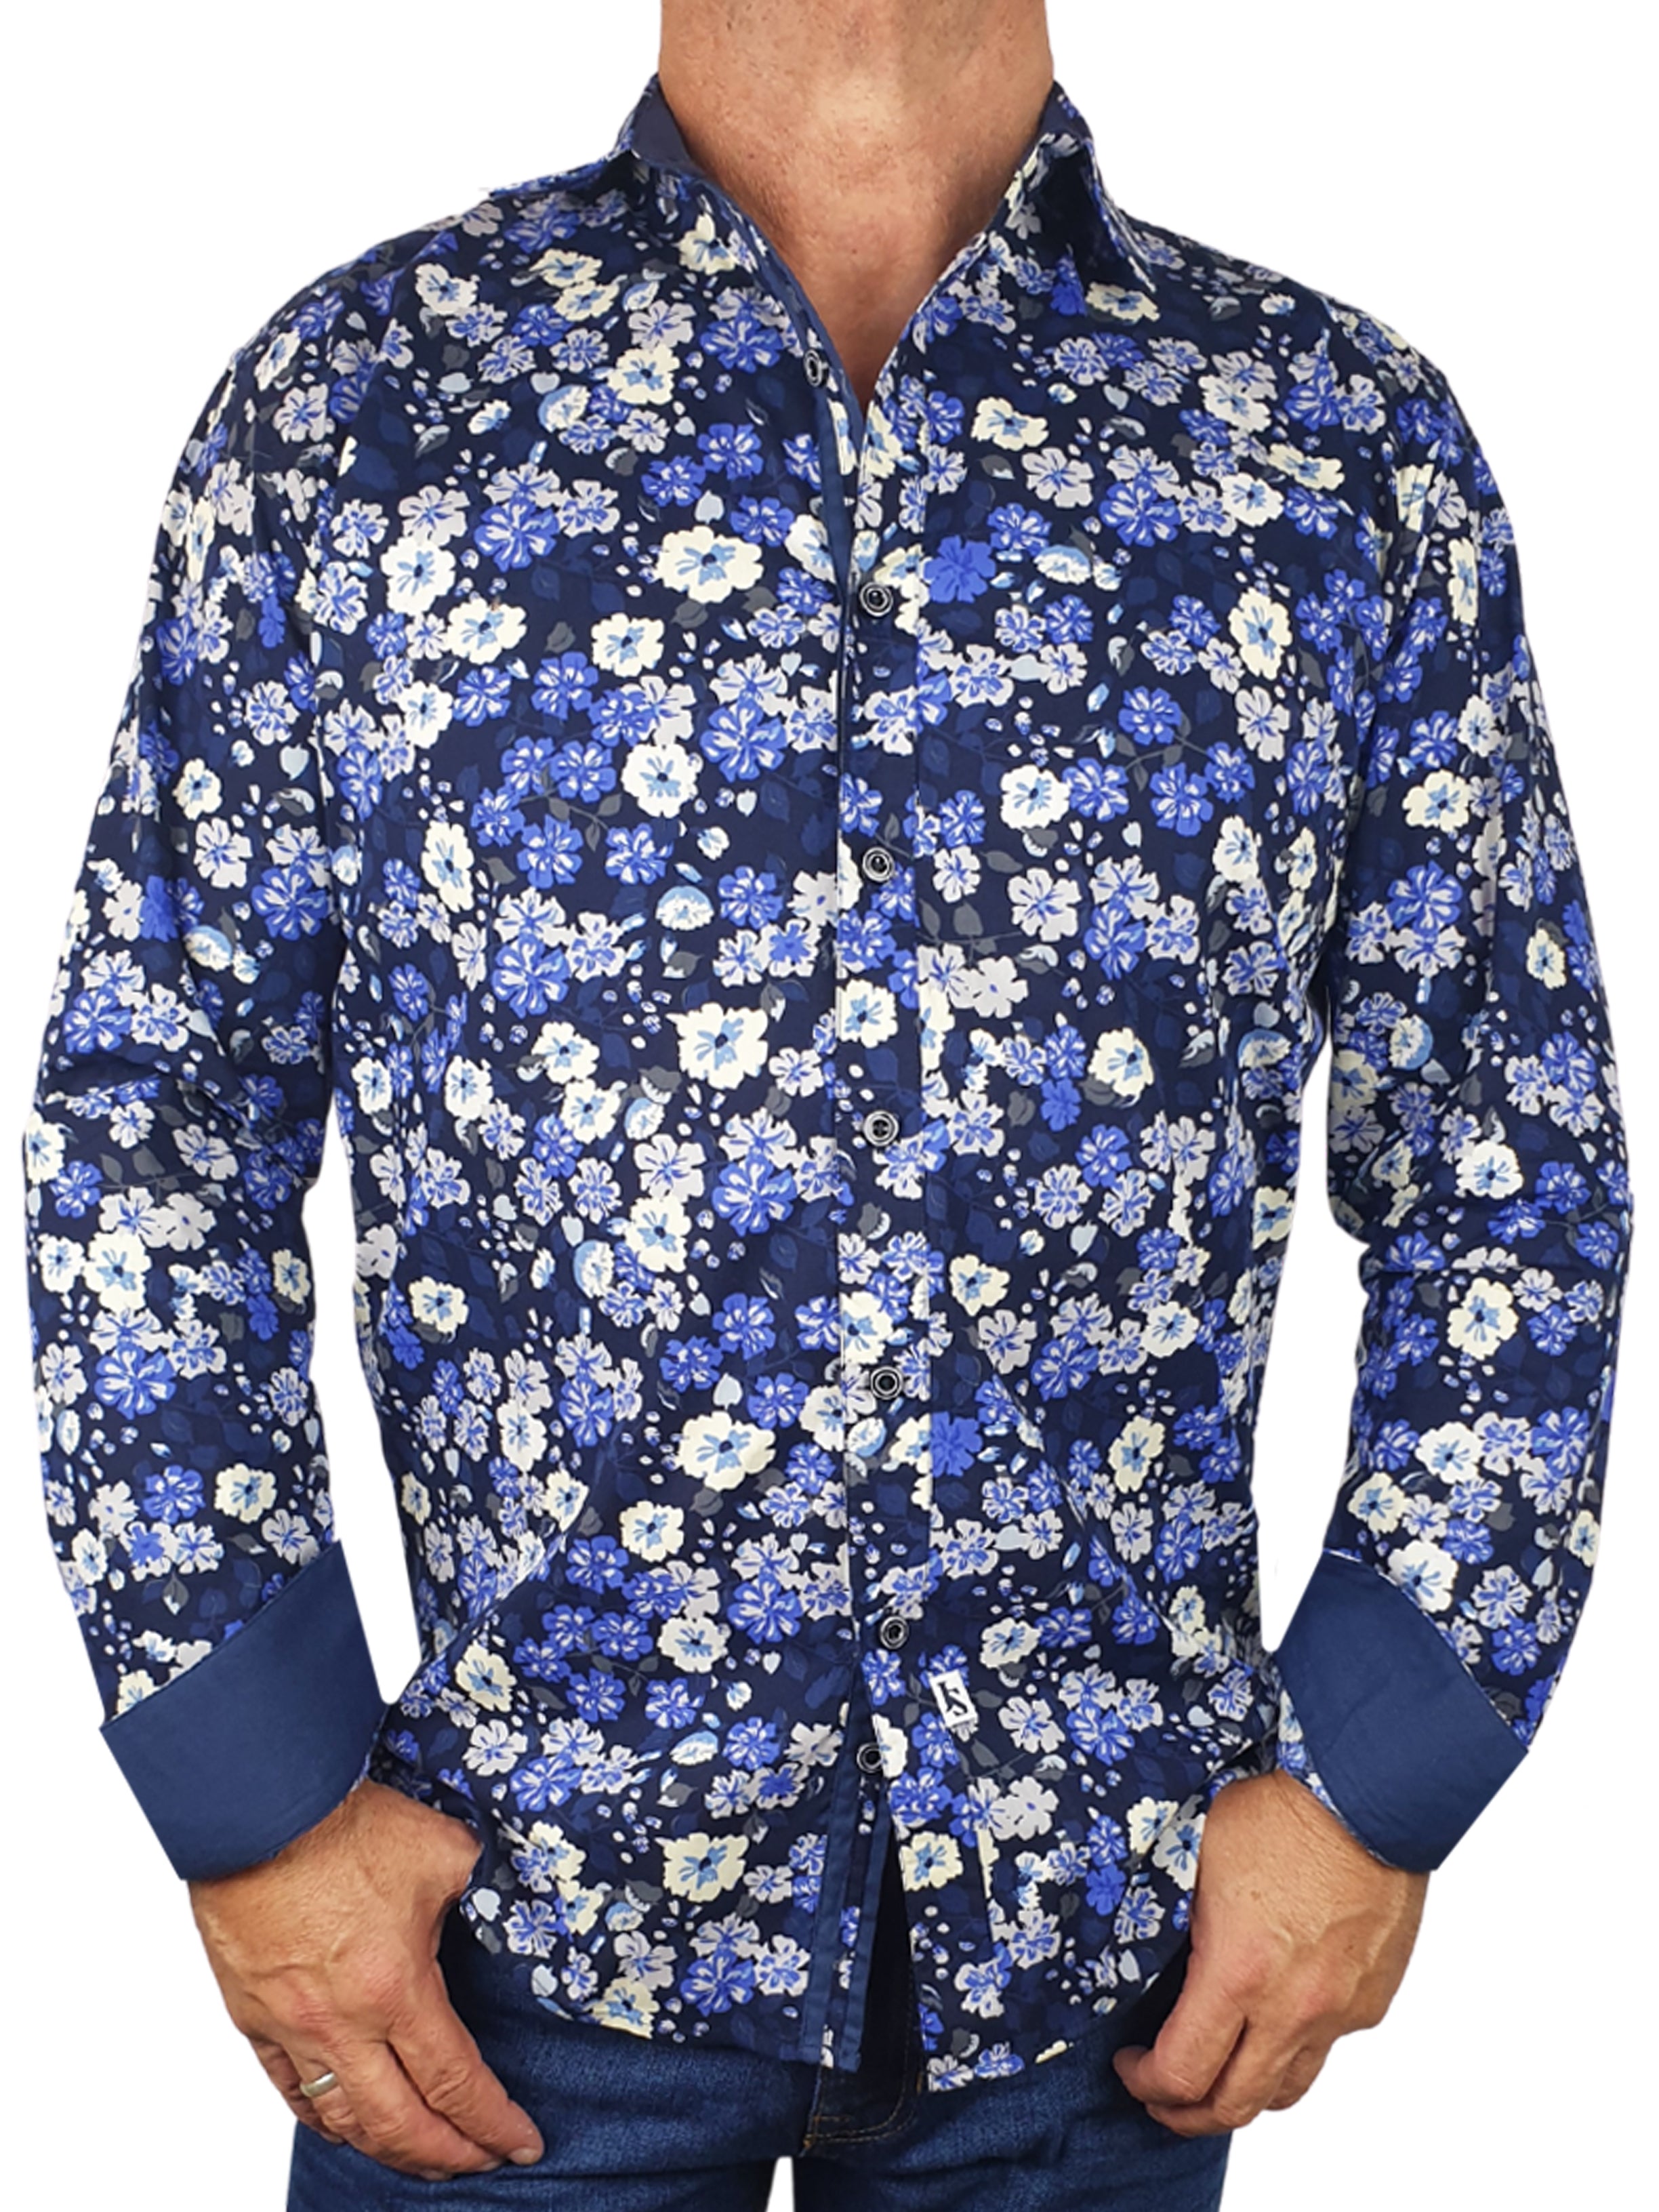 Wicked Floral Cotton L/S Shirt - Blue